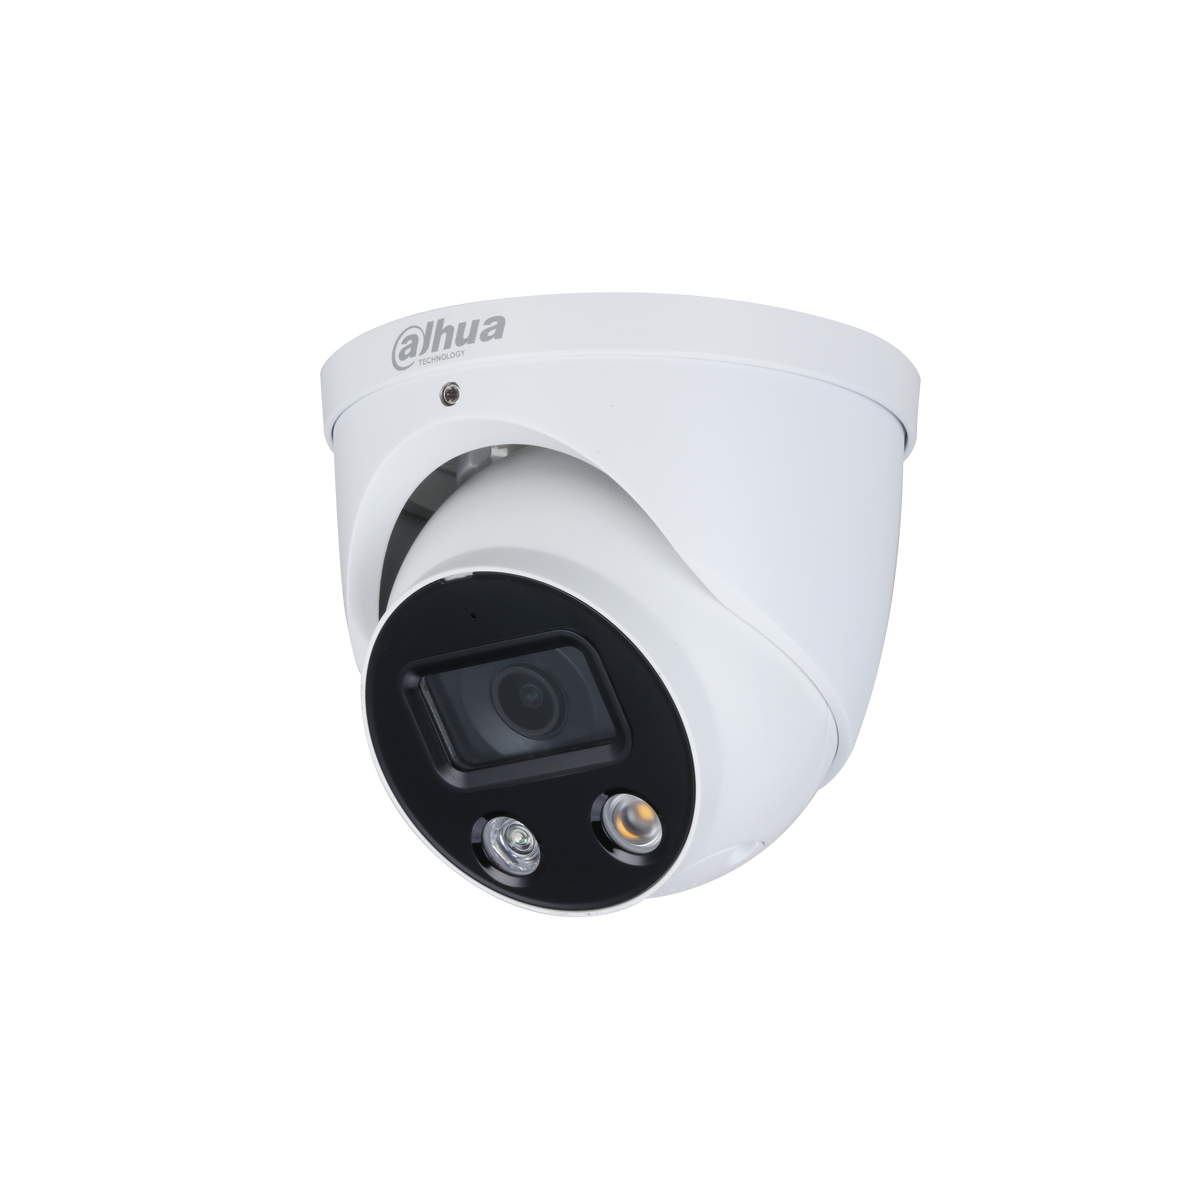 4MP Full-color Active Deterrence Fixed-focal Eyeball WizSense Network Camera DH-IPC-HDW 3449 HP-AS-PV